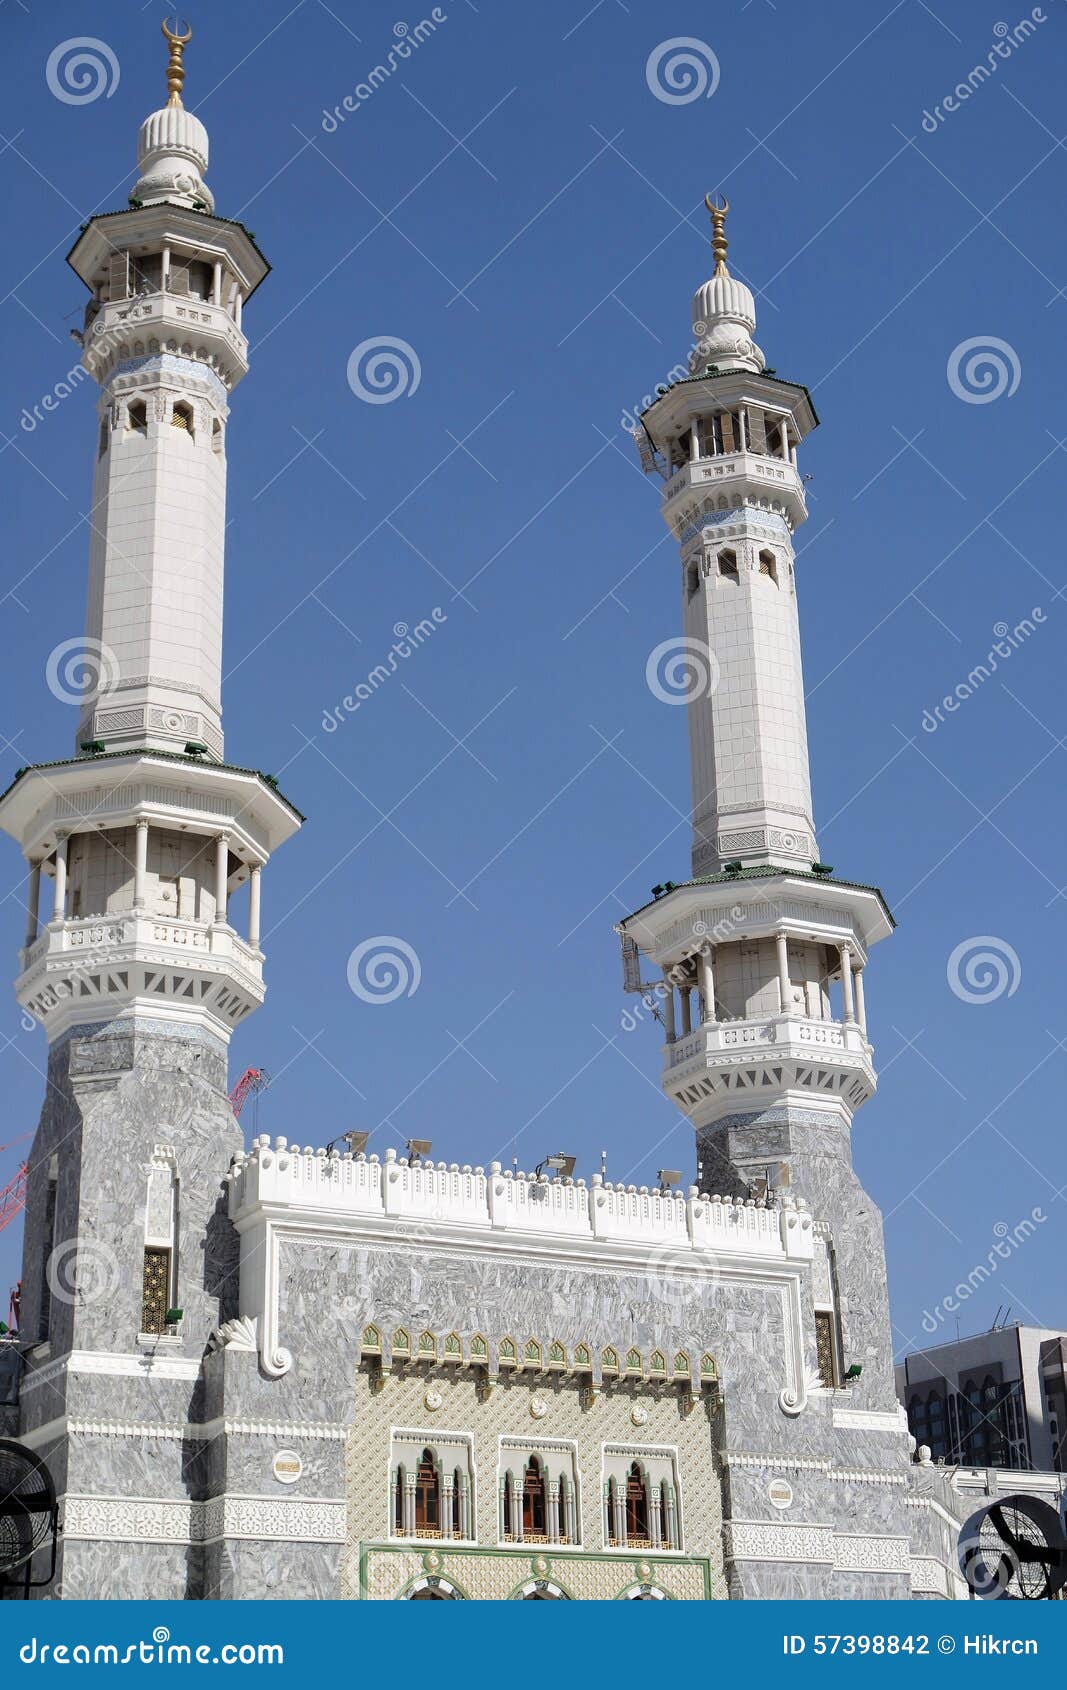 Kaaba Minaret In Mecca Editorial Photography - Image: 57398842